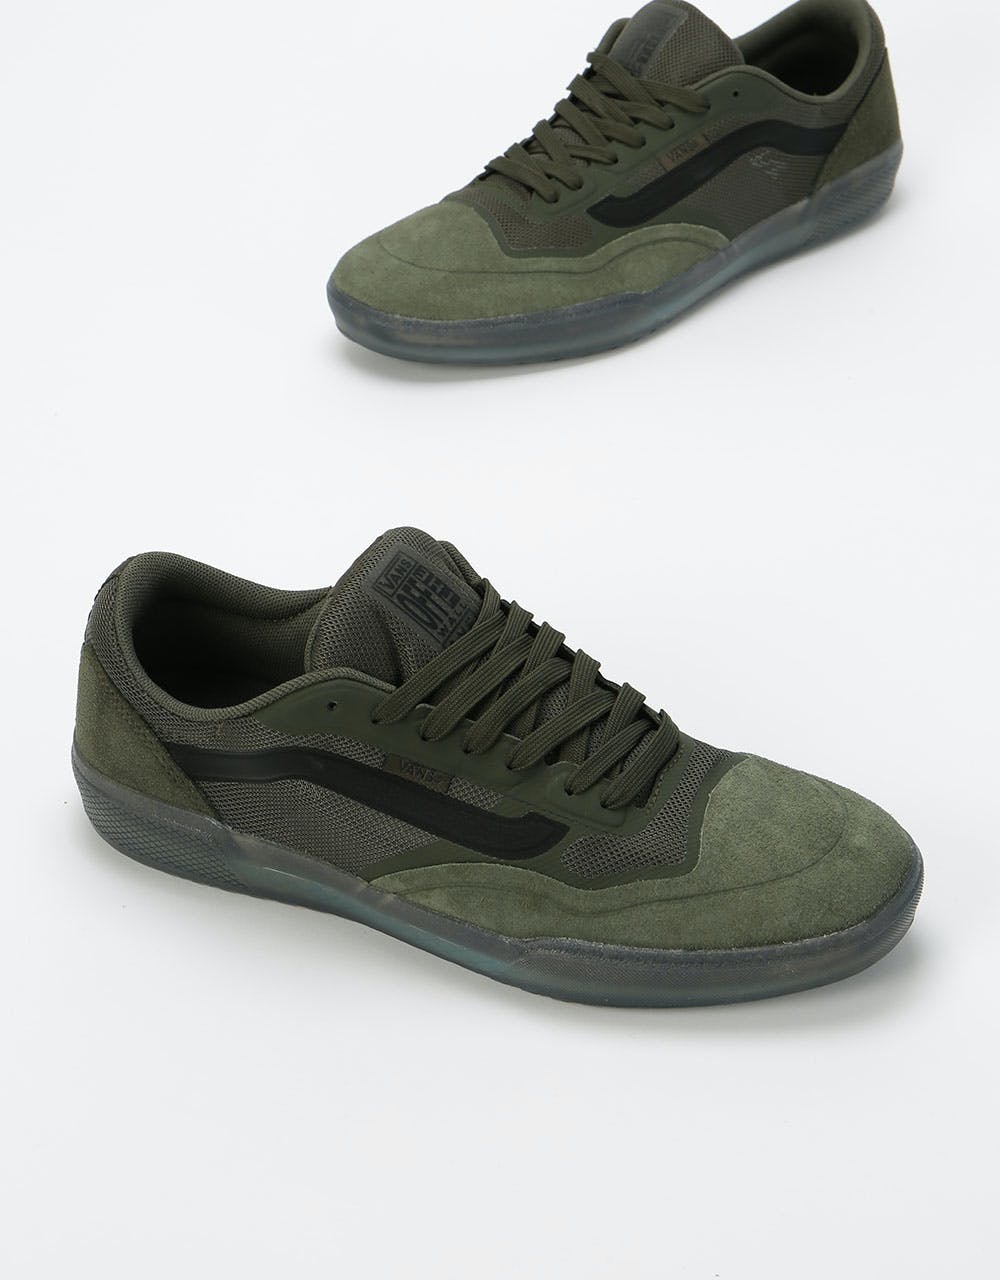 Vans Ave Pro Skate Shoes - (Rainy Day) Forest Night/Black